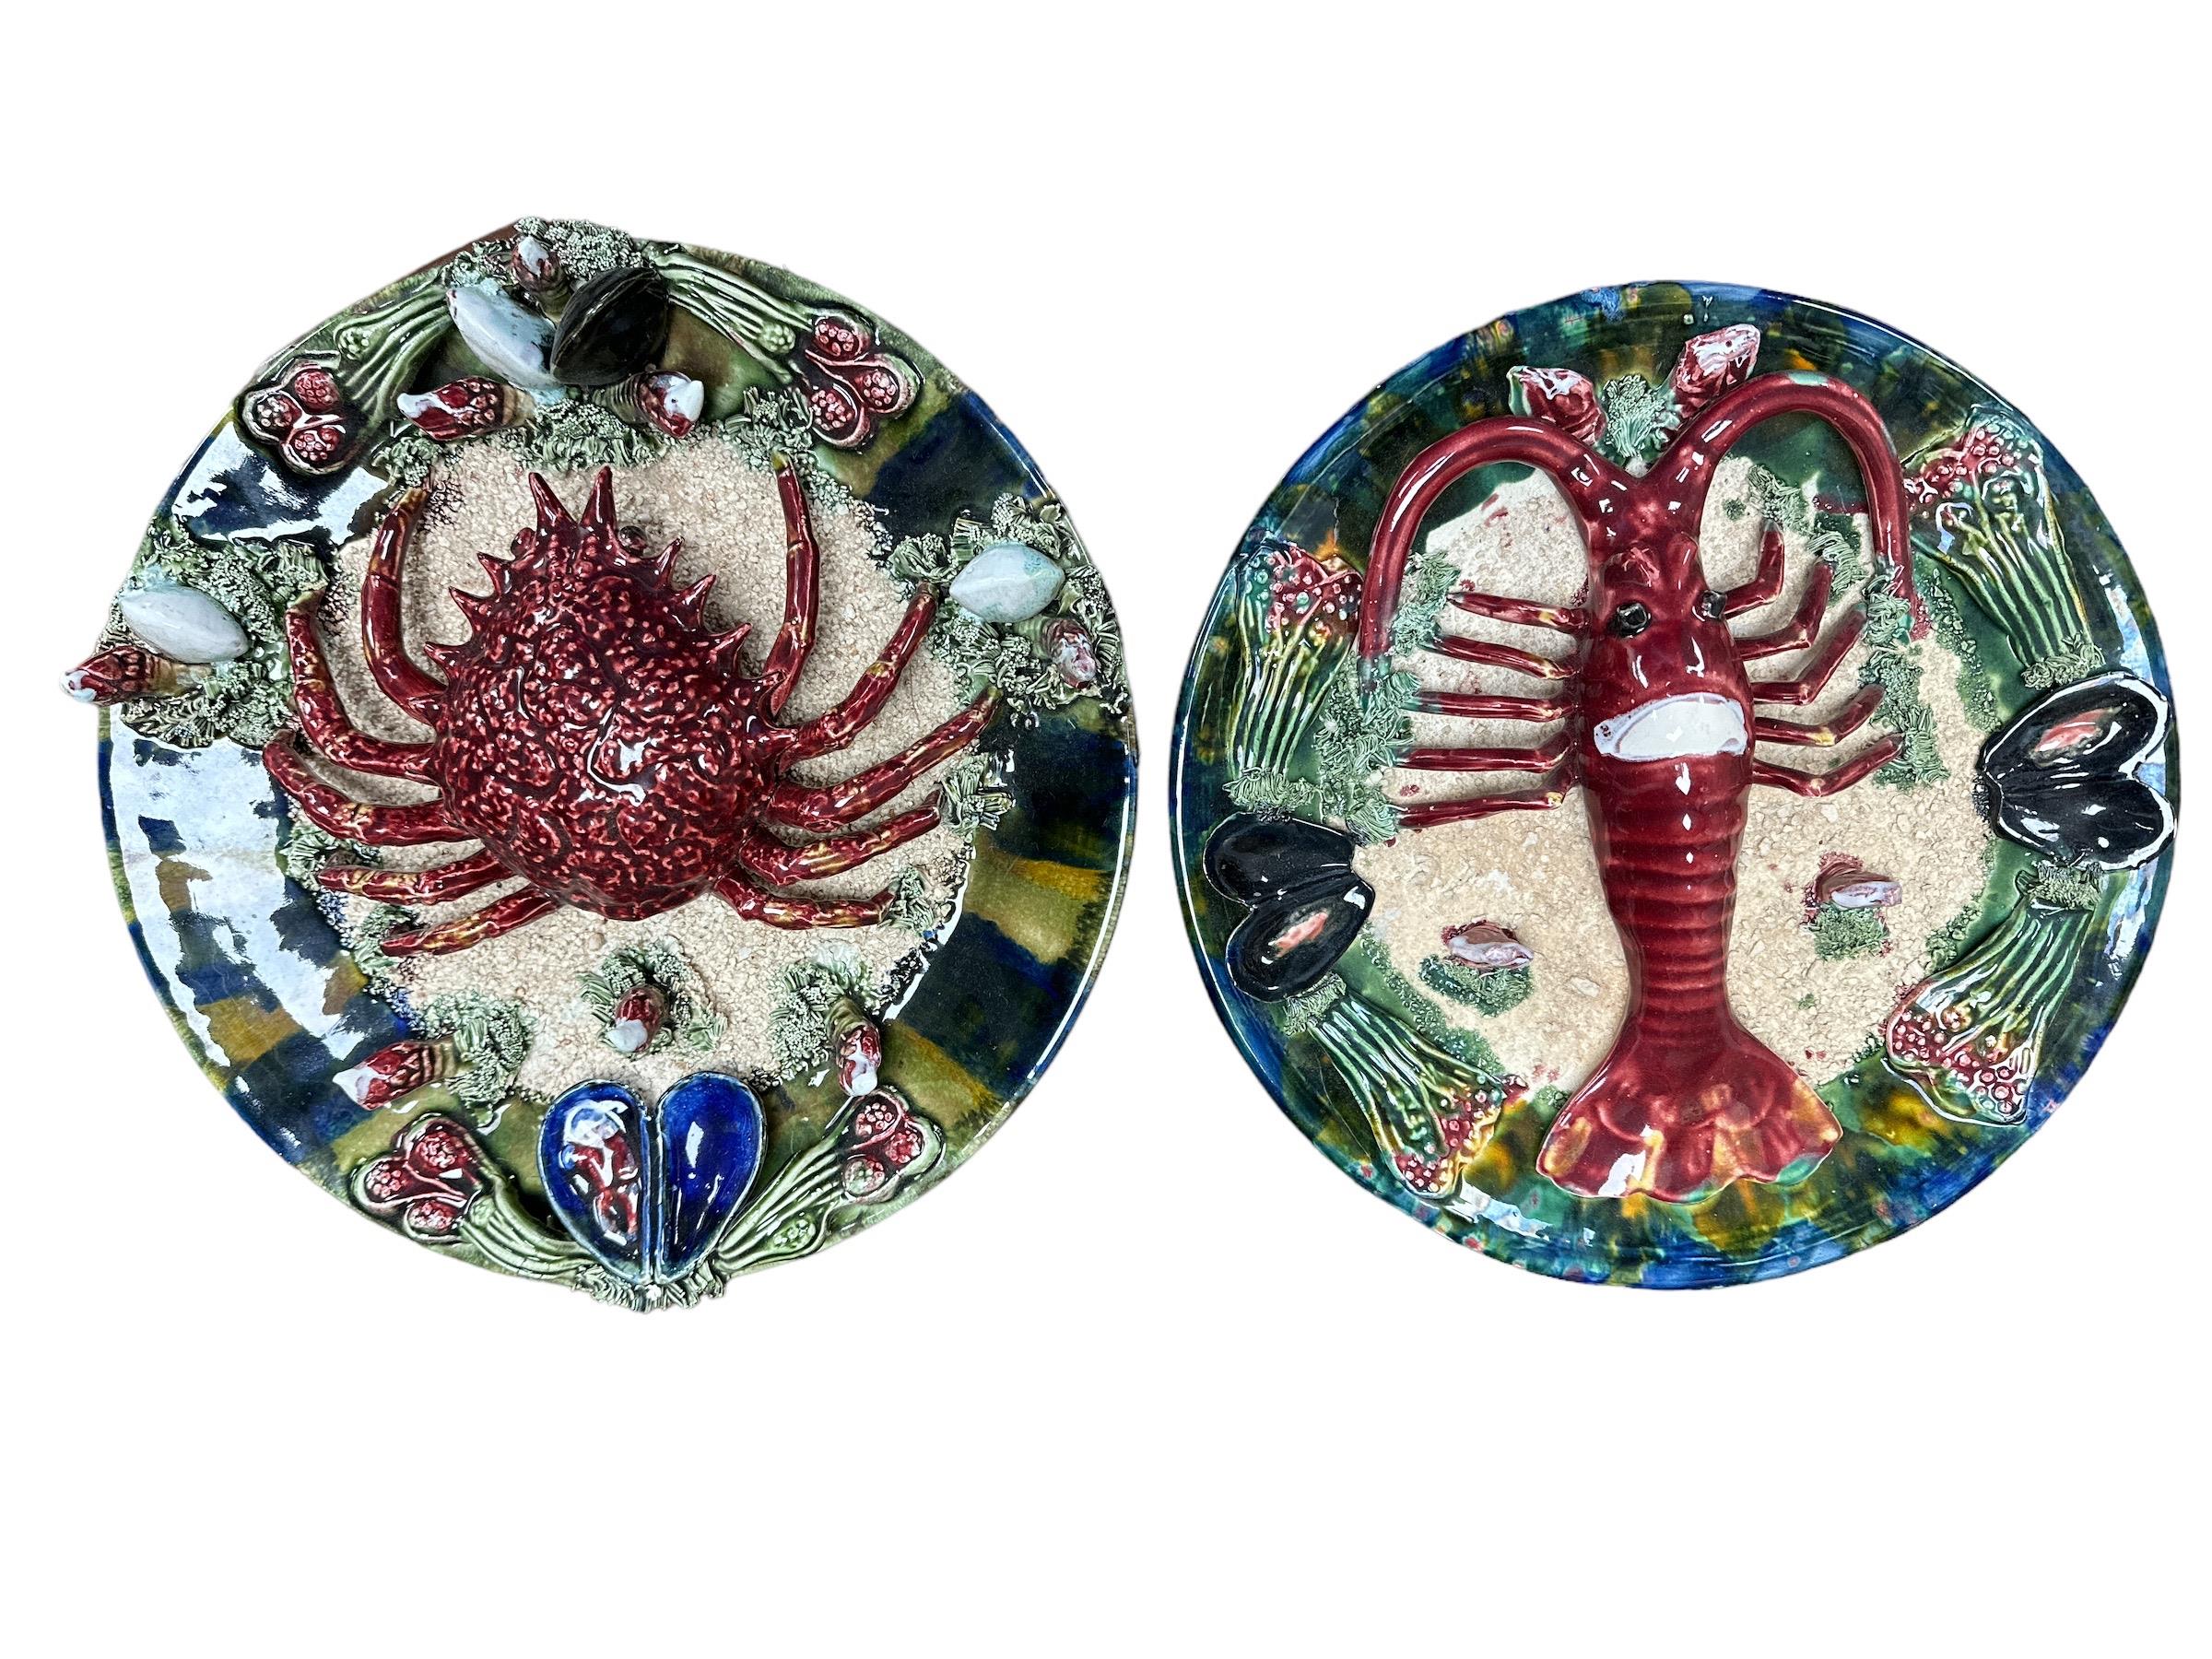 Two Majolica dishes - a crab and a lobster.